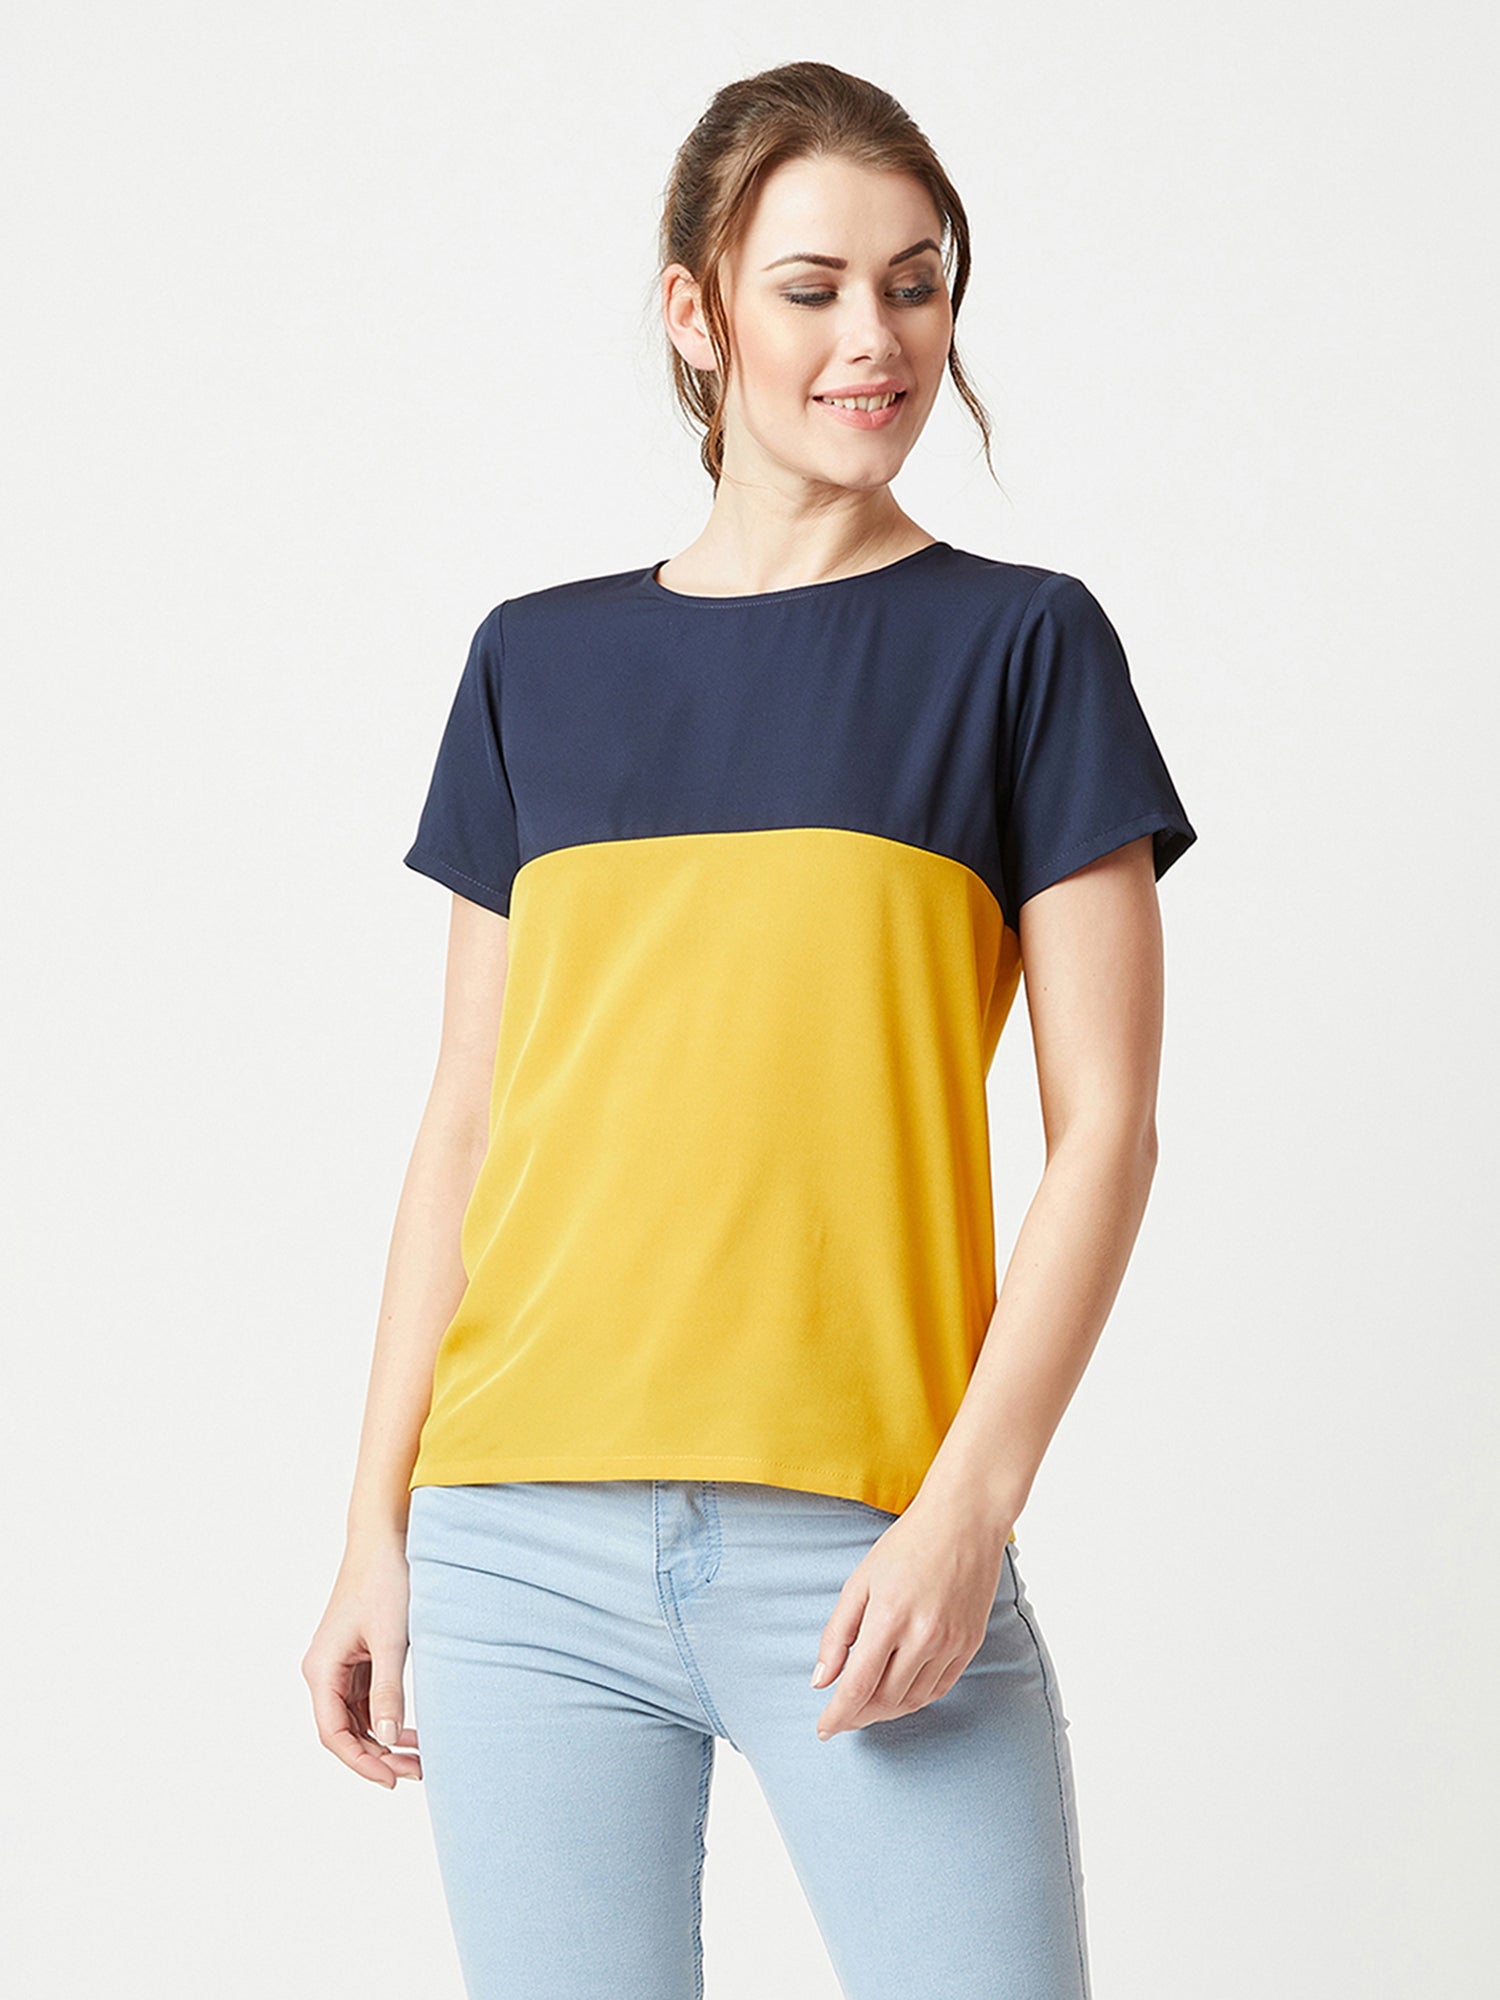 MISS CHASE | Multicolored With A Navy Blue Base Round Neck Short Sleeve Solid Color block Boxy Top